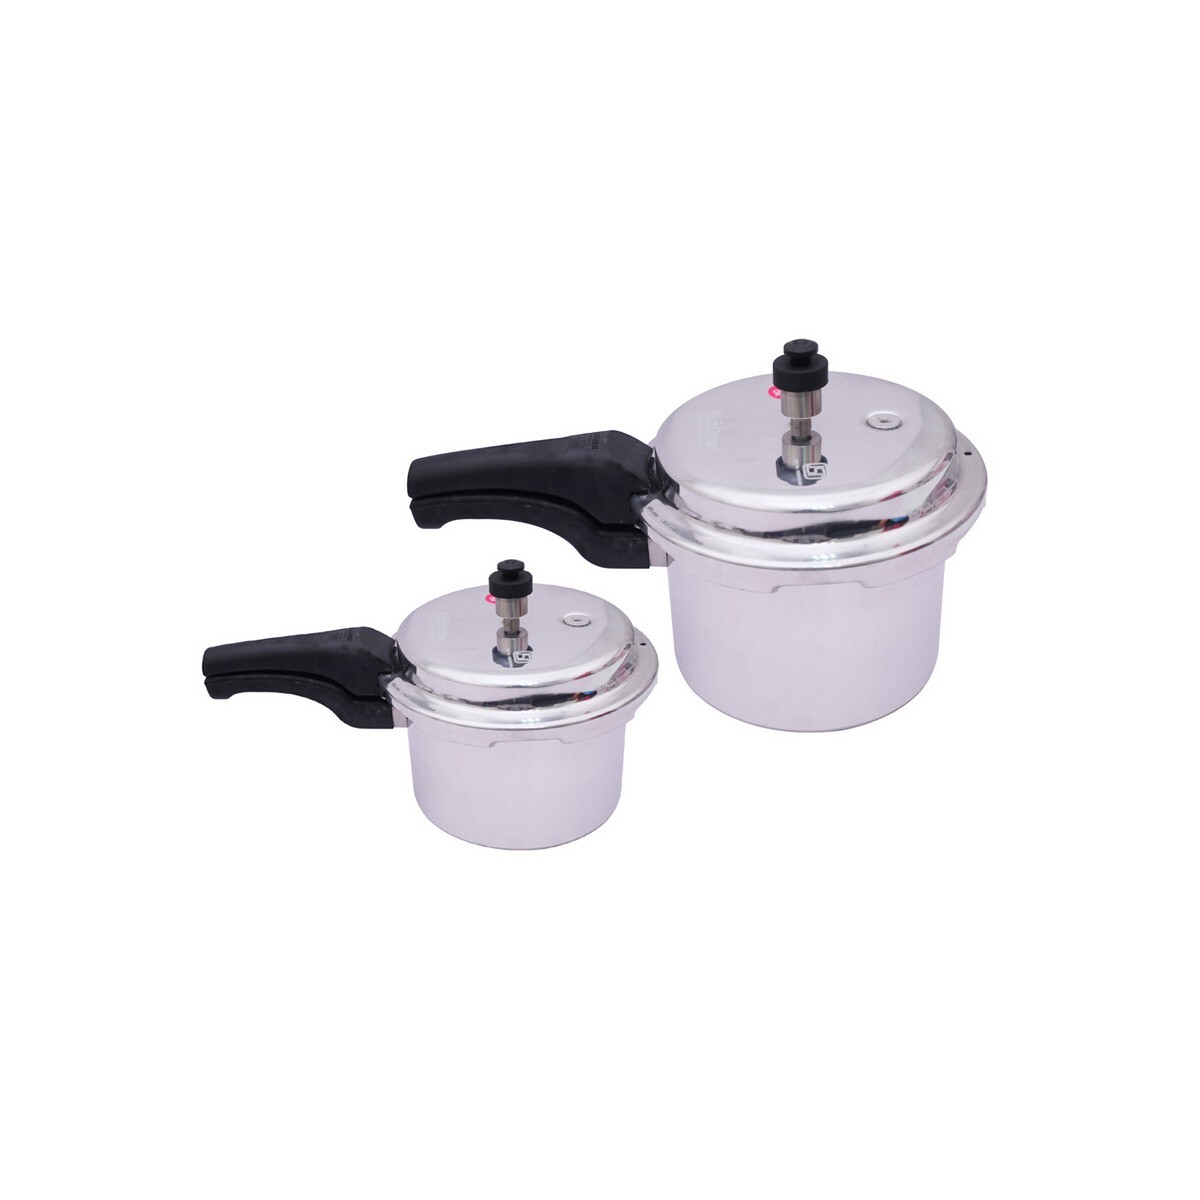 Fora Kitchen Aluminium Pressure Cooker Combo Induction Based 5+3L